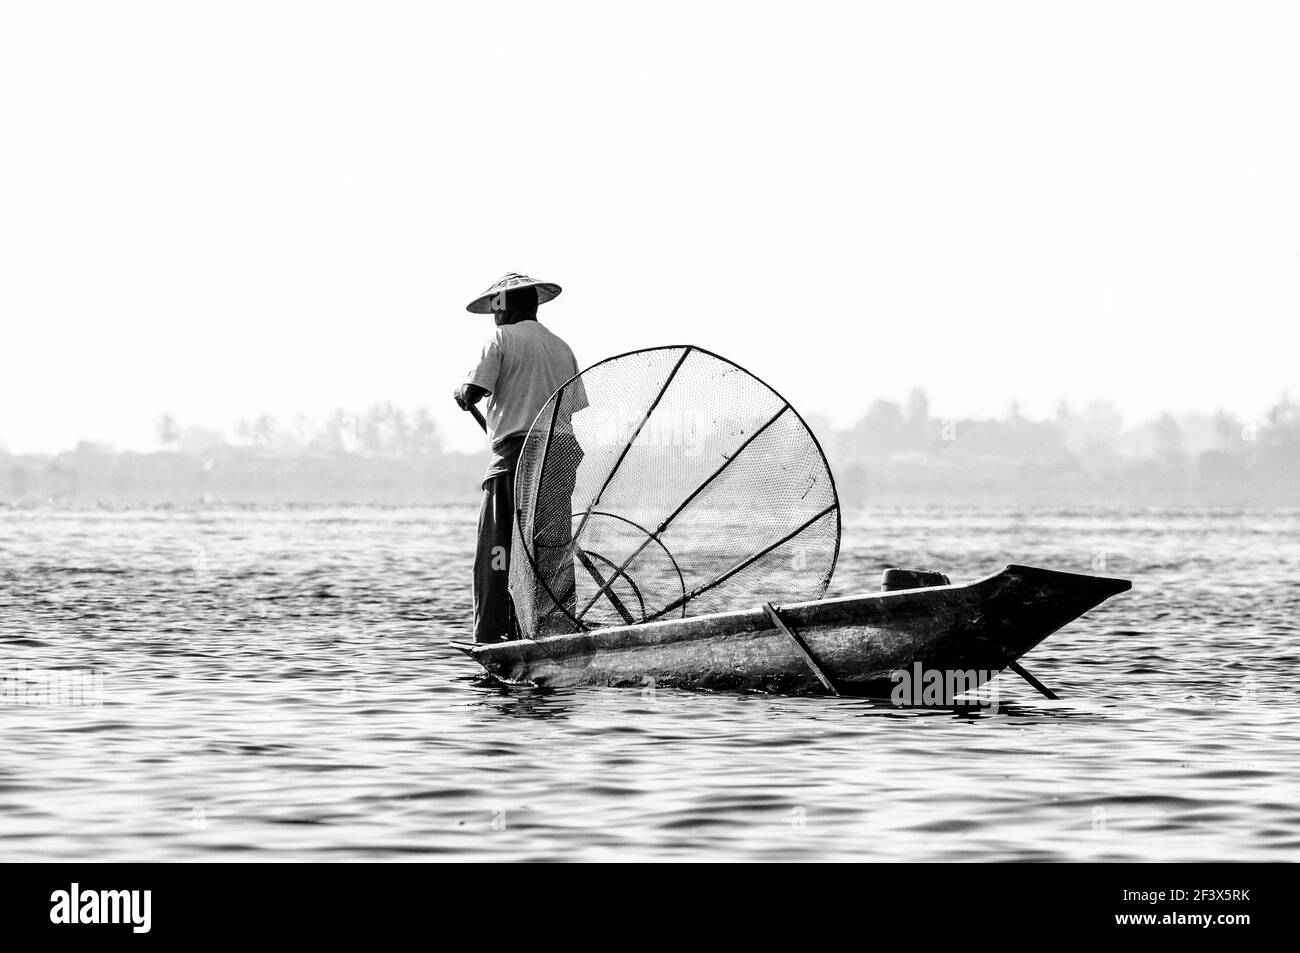 Traditional Burmese fisherman at Inle lake, one legged rowing style, the art of balance in perfection, Myanmar. Stock Photo